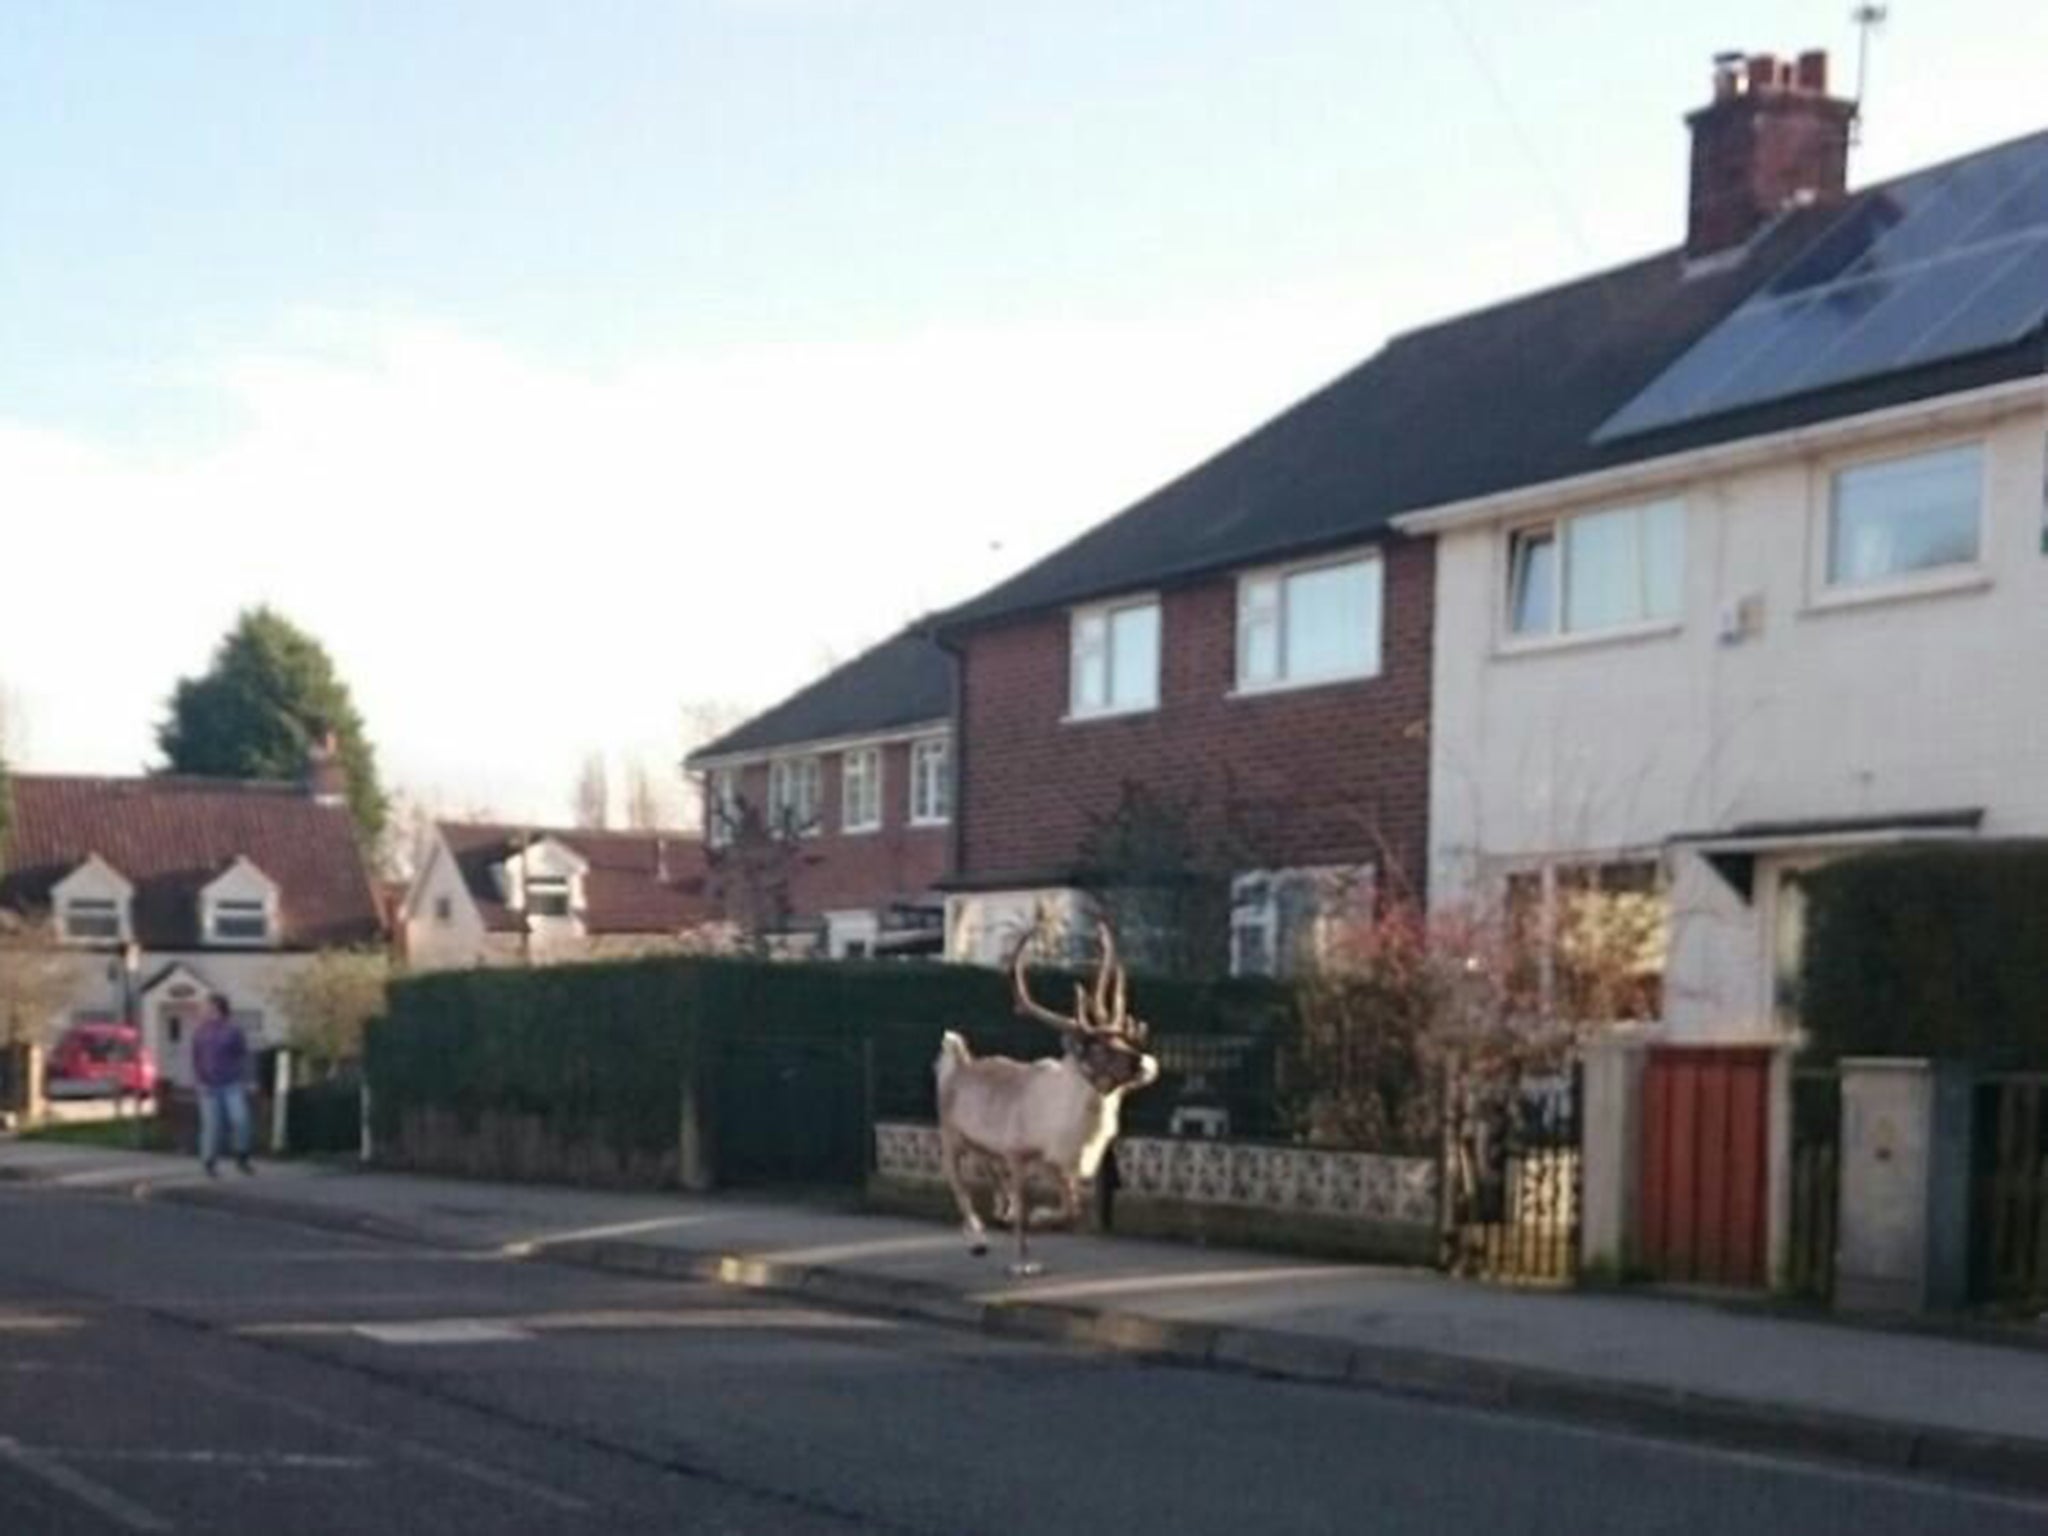 A reindeer on the loose in Nottingham on Sunday